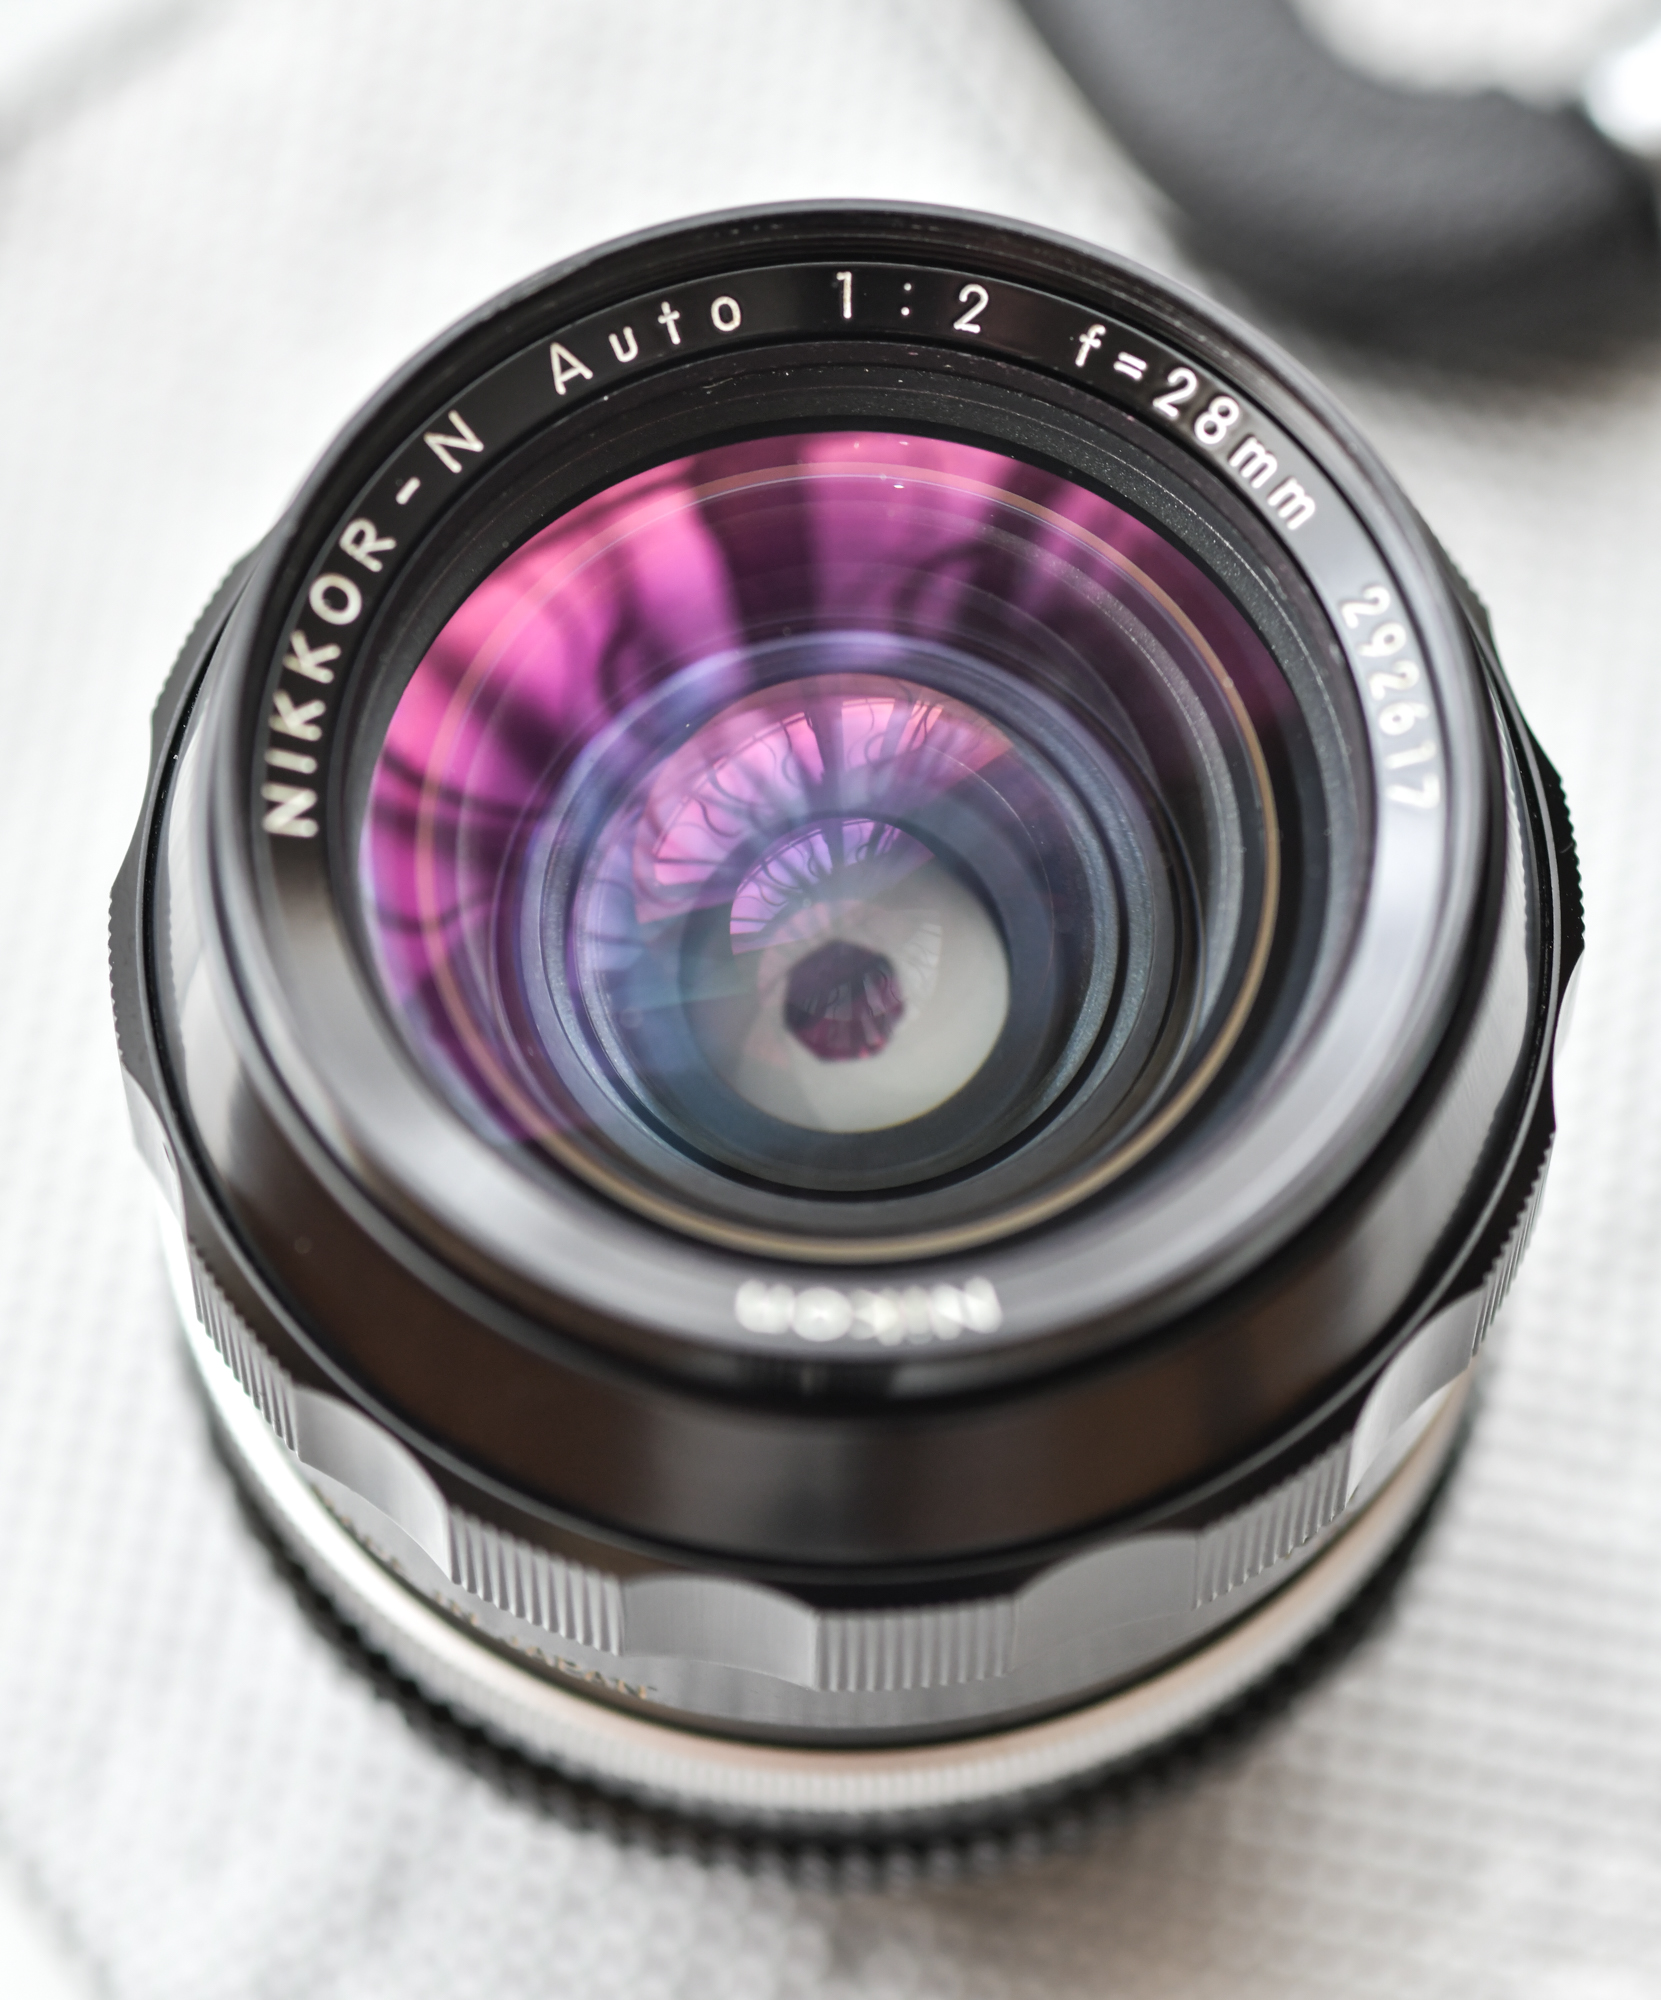 Nikon ニコン New Nikkor 28mm f2.8 Ai改